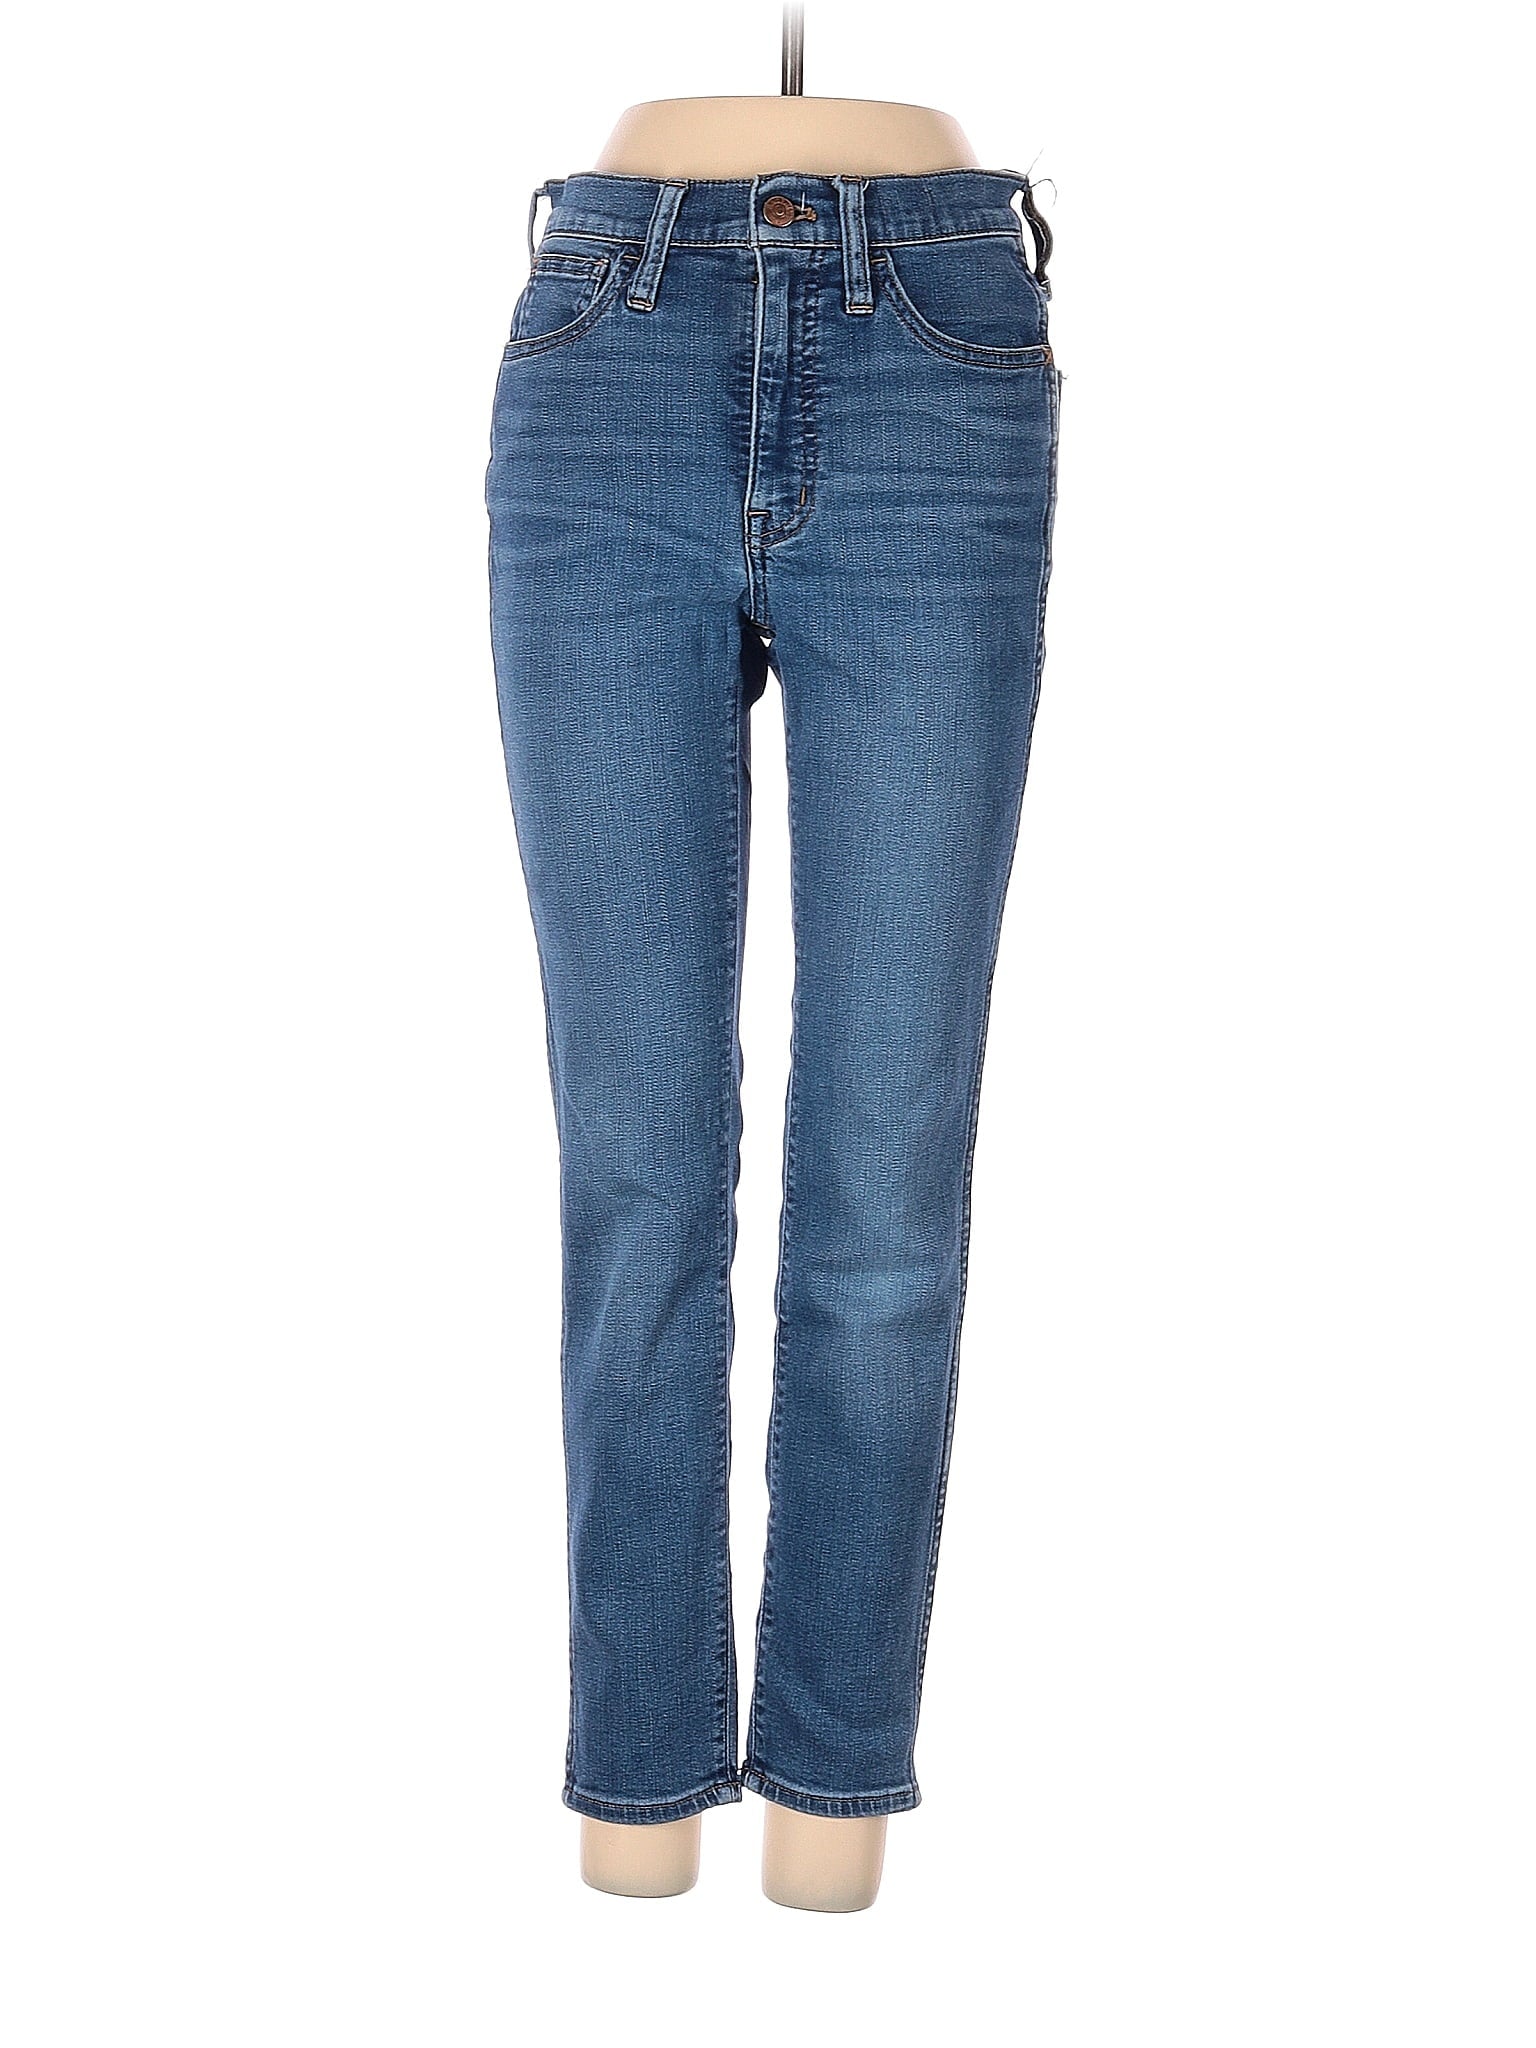 Mid-Rise Boyjeans Petite 10" High-Rise Roadtripper Supersoft Jeans In Playford Wash in Medium Wash waist size - 25 P